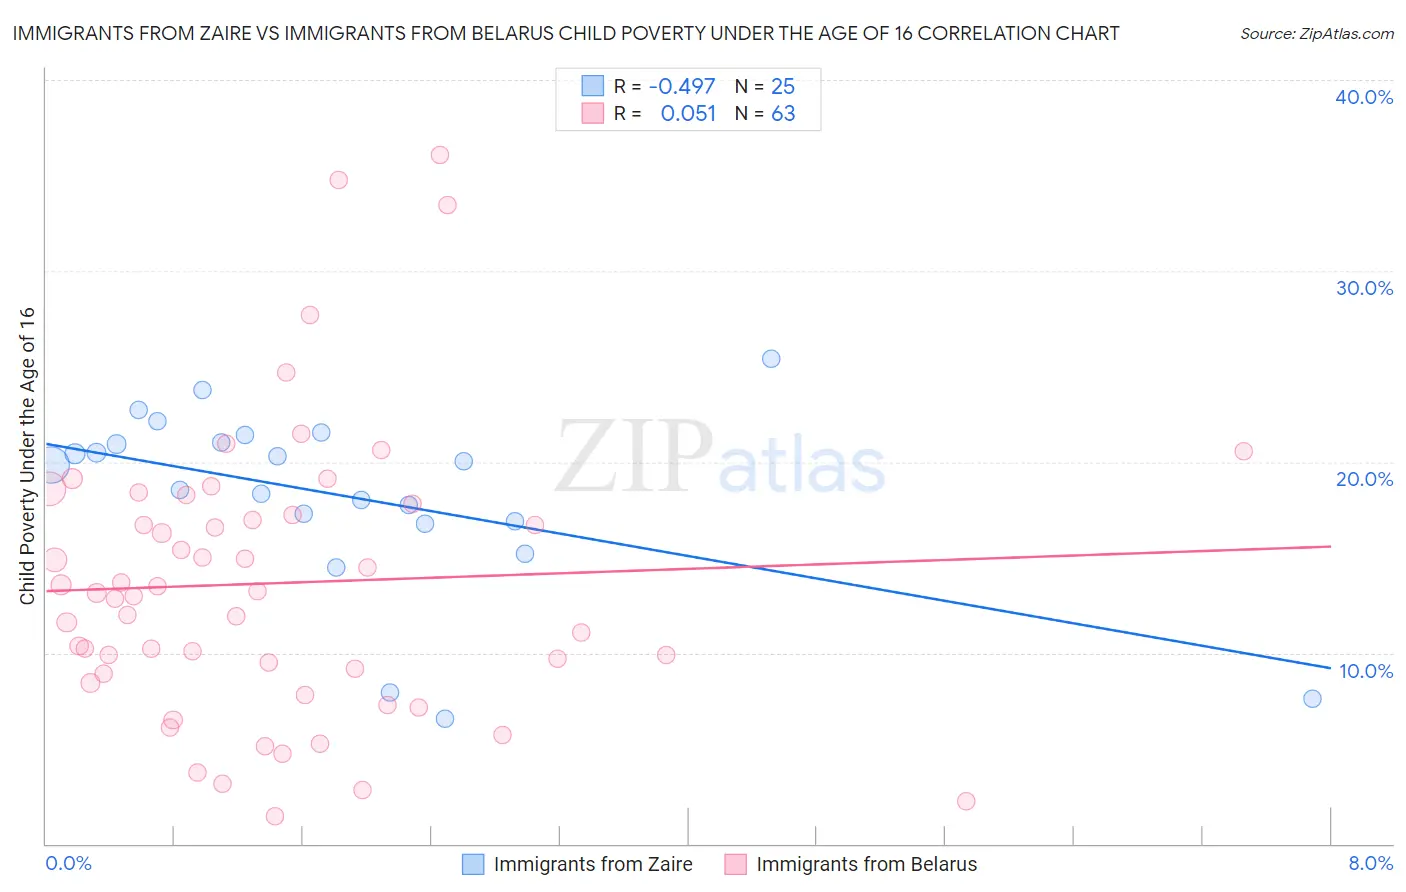 Immigrants from Zaire vs Immigrants from Belarus Child Poverty Under the Age of 16